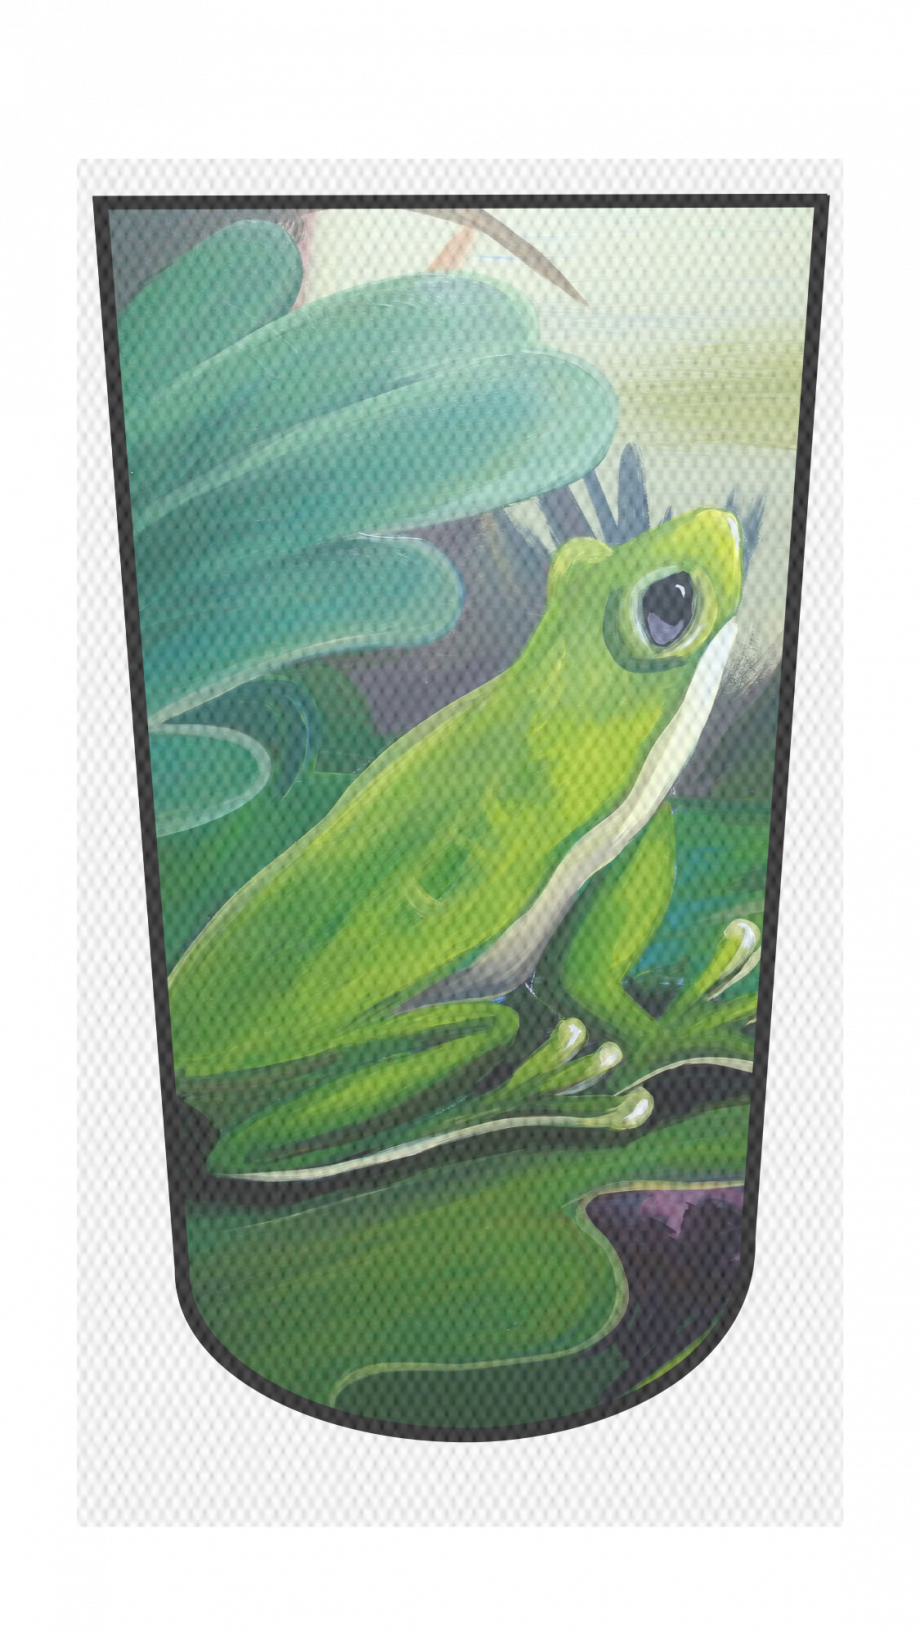 Green Frog on lily pad tropical scene adlt mockup